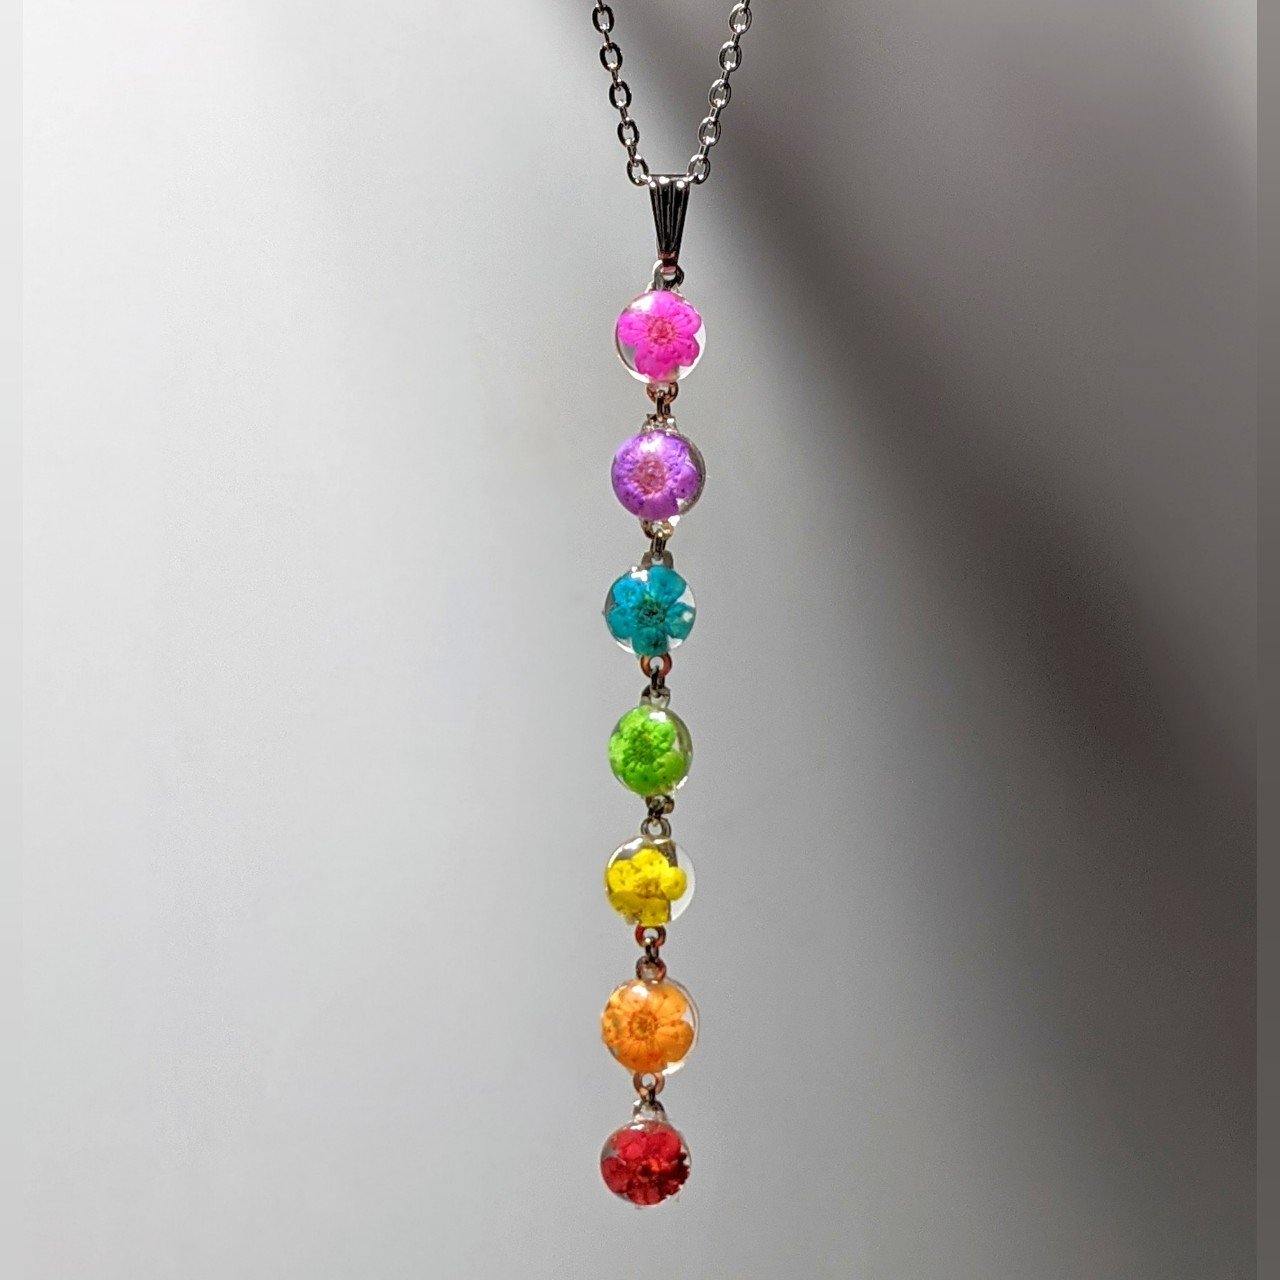 Natural Vitality: Chakra necklace with real mini flower handmade pendants - Nature's Lure